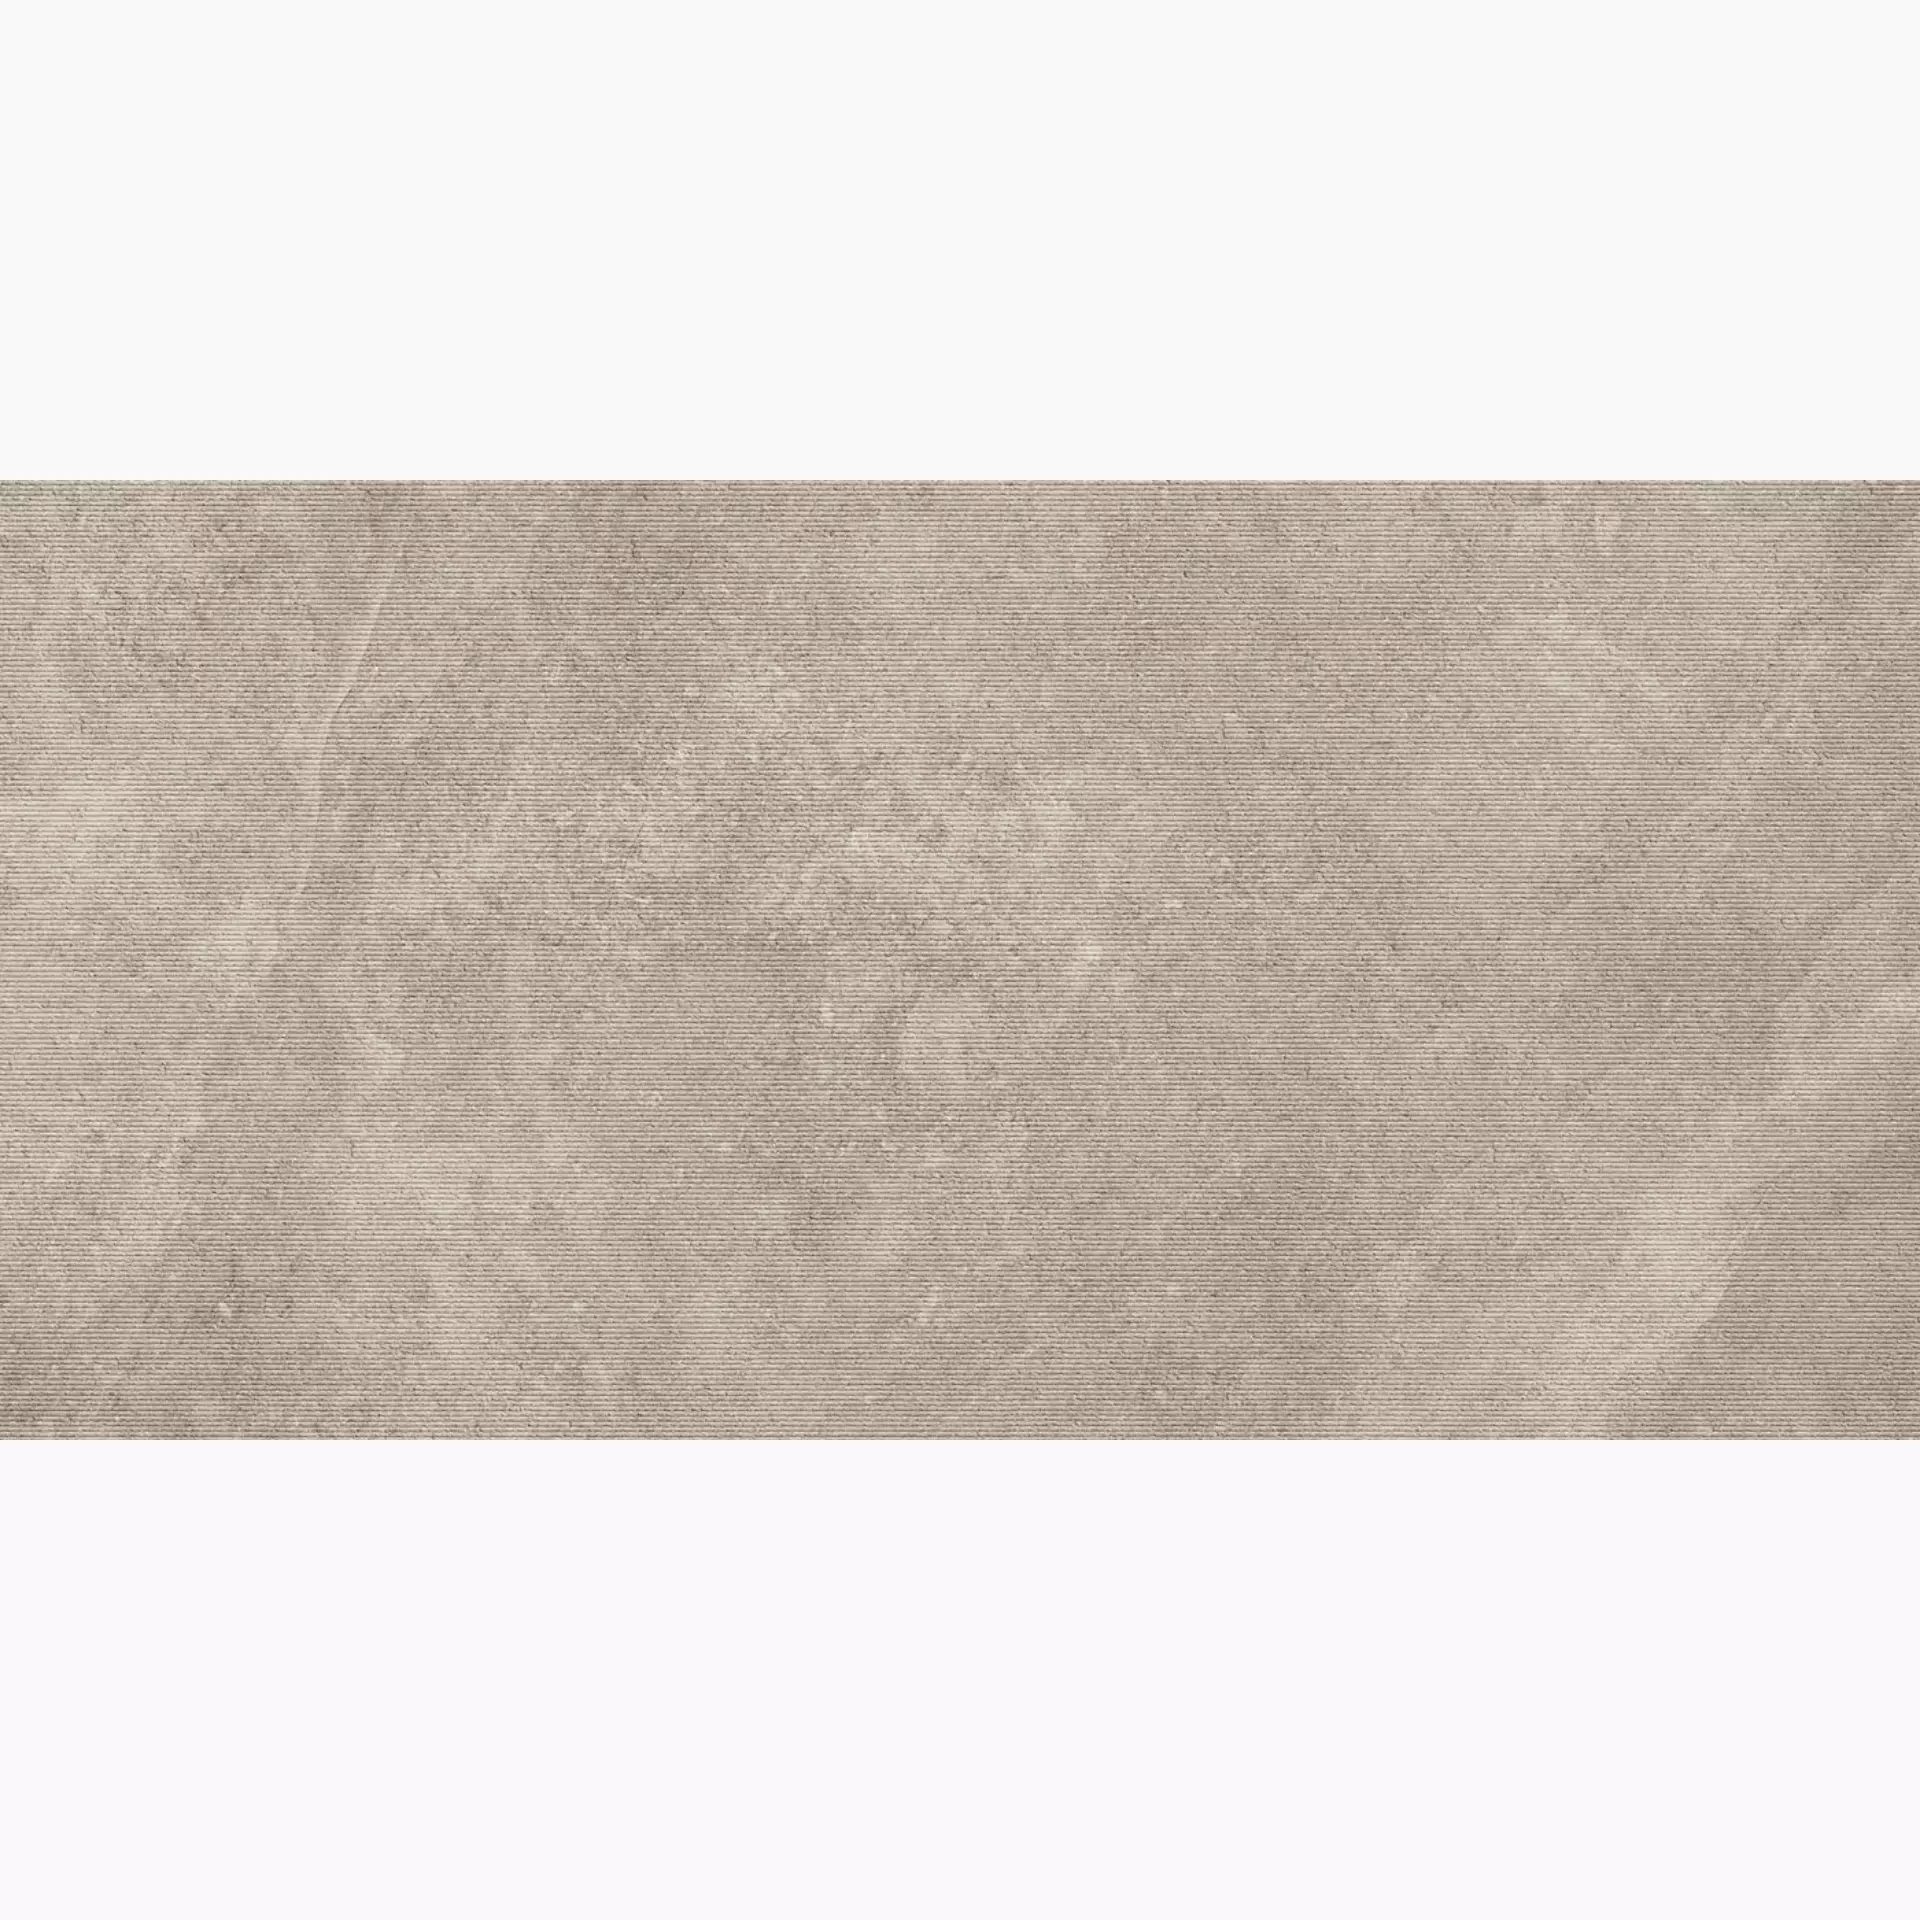 Magica Leccese Tortora Chiselled MALC02612CH 60x120cm rectified 10,5mm